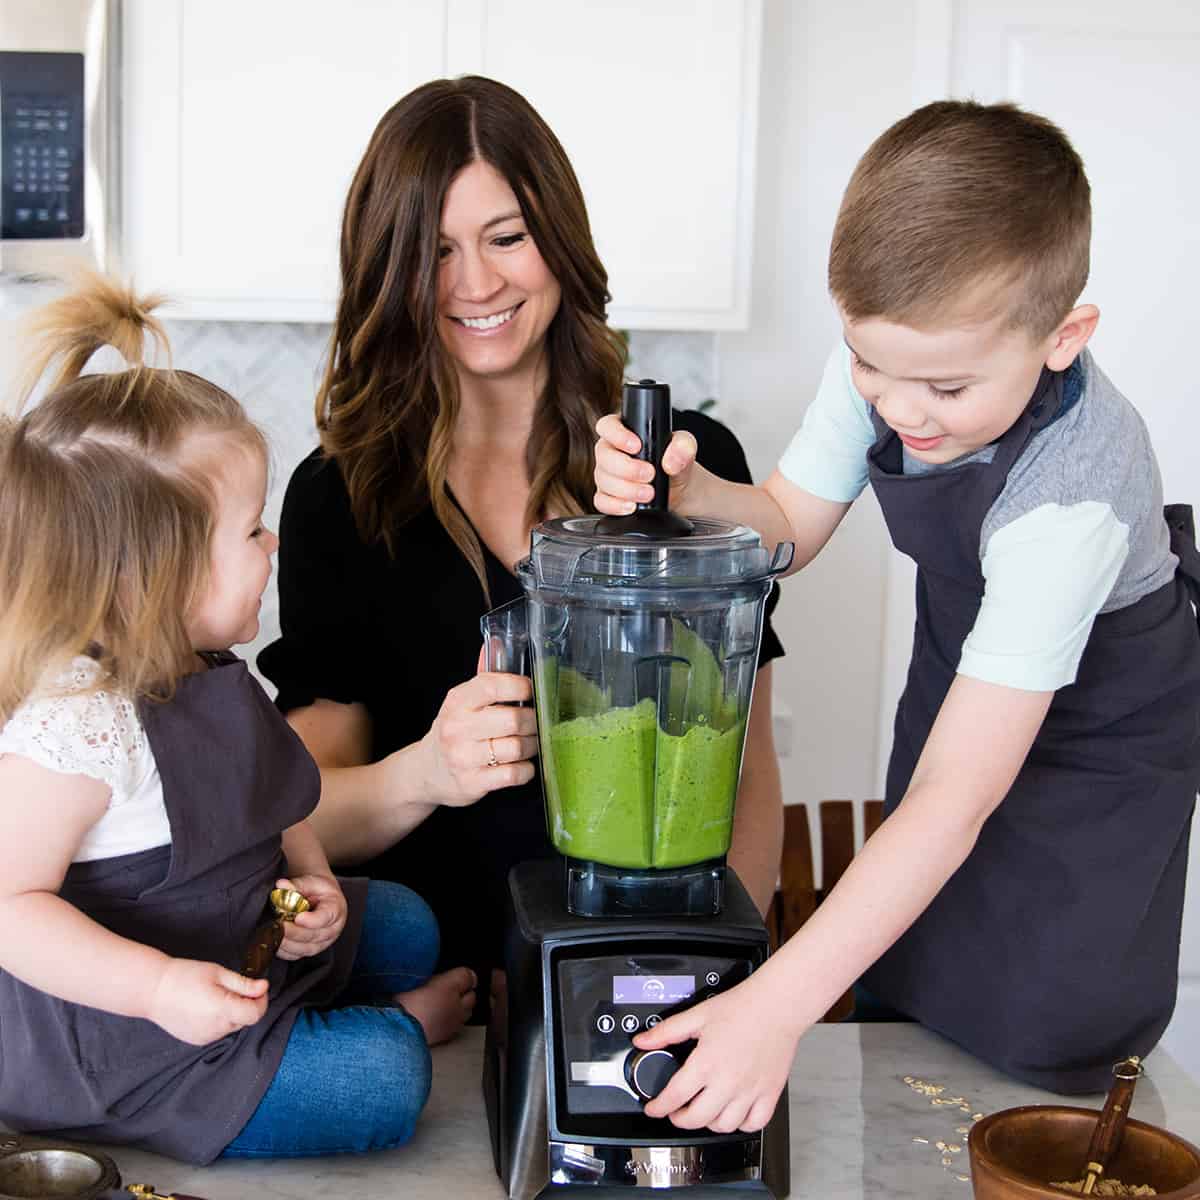 How to Make A Smoothie - mom making a smoothie with her two kids